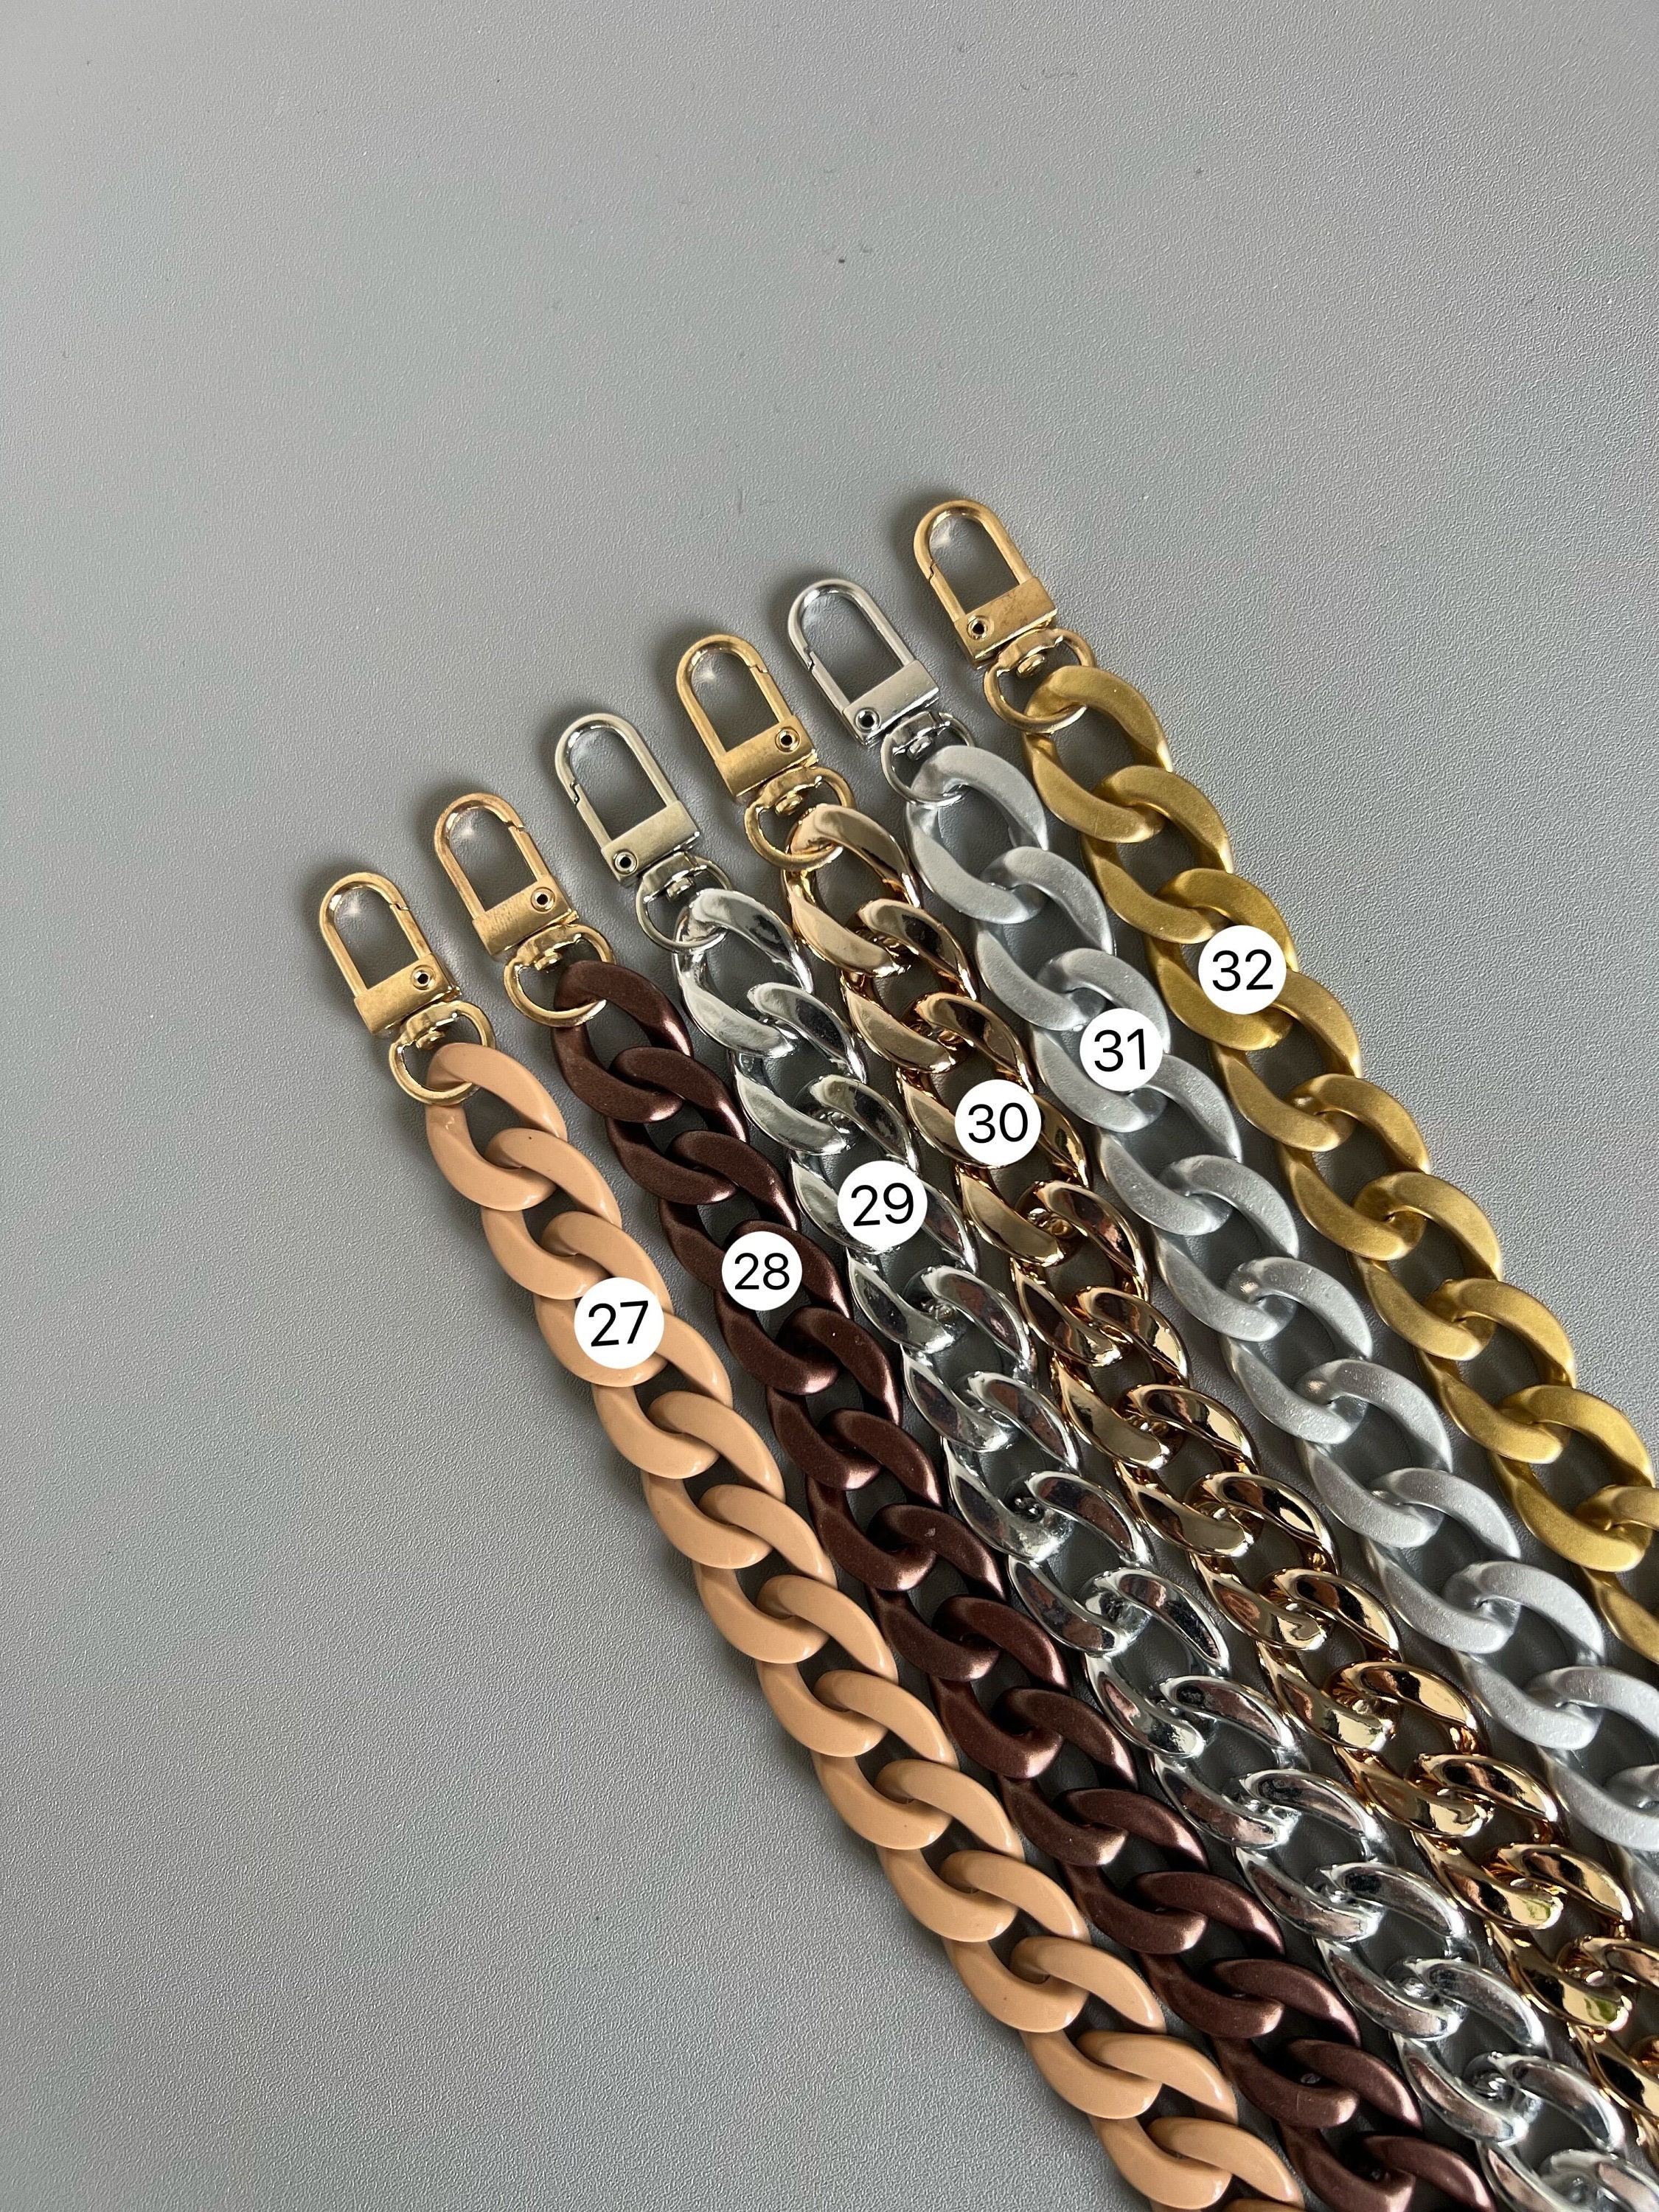 LOVLLE 4 Pcs Gold Purse Chain Strap - Flat Iron Bag Chains with D Ring Rivets for Replacement Shoulder Handbag Crossbody Clutch Wall